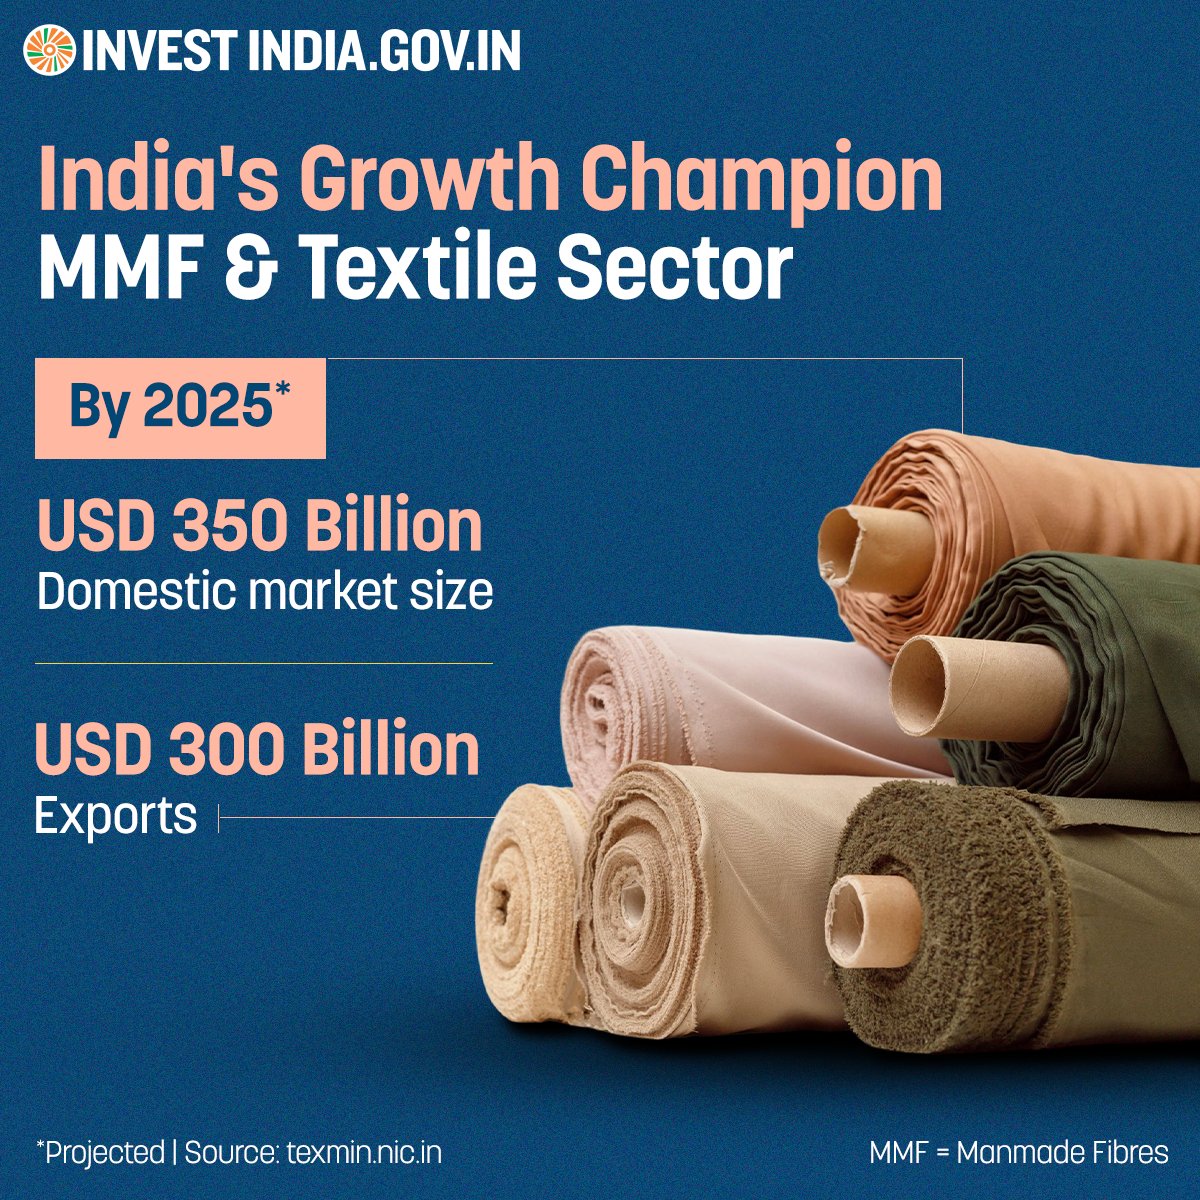 #InvestInIndia

#NewIndia’s domestic consumption of textiles and apparel is estimated to reach ~USD 145 Billion by 2025!

Discover more at: bit.ly/textiles-appar…

#TextileIndustry #IndianTextiles #Exports #Textiles @indemtel @IsraelTradeIND @IsraelMFA @MayaKadosh @AlonUshpiz